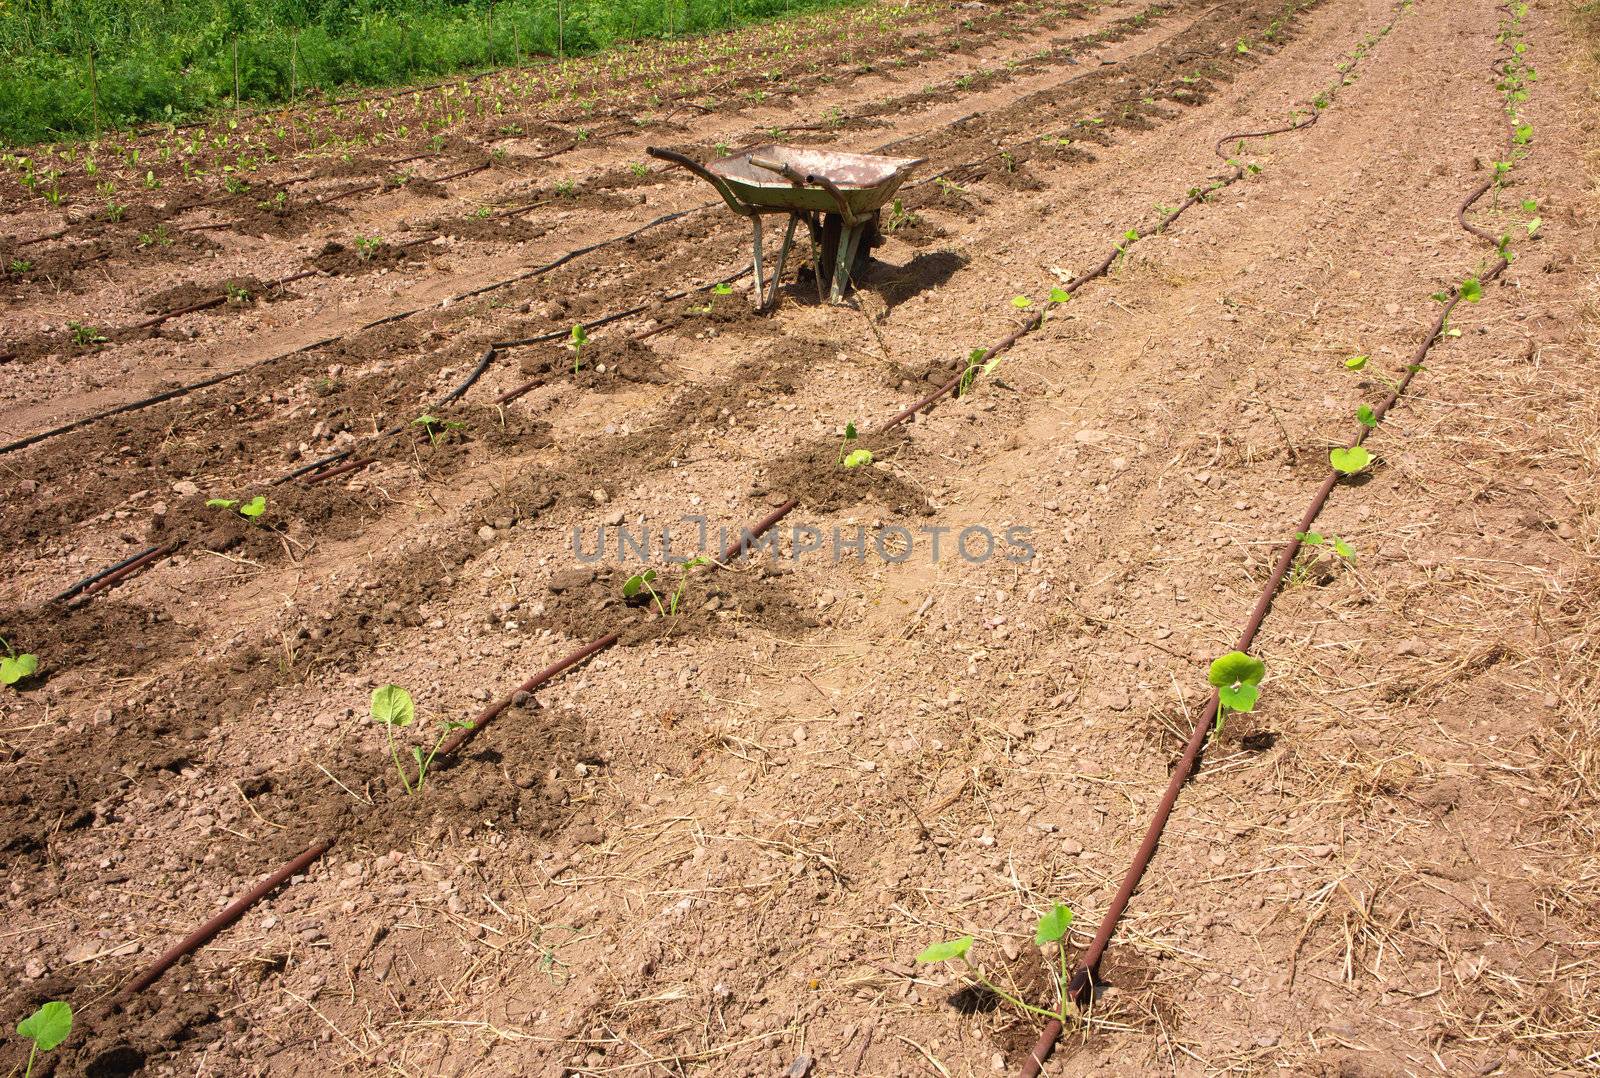 Truck in eco agricultural garden with drip irrigation